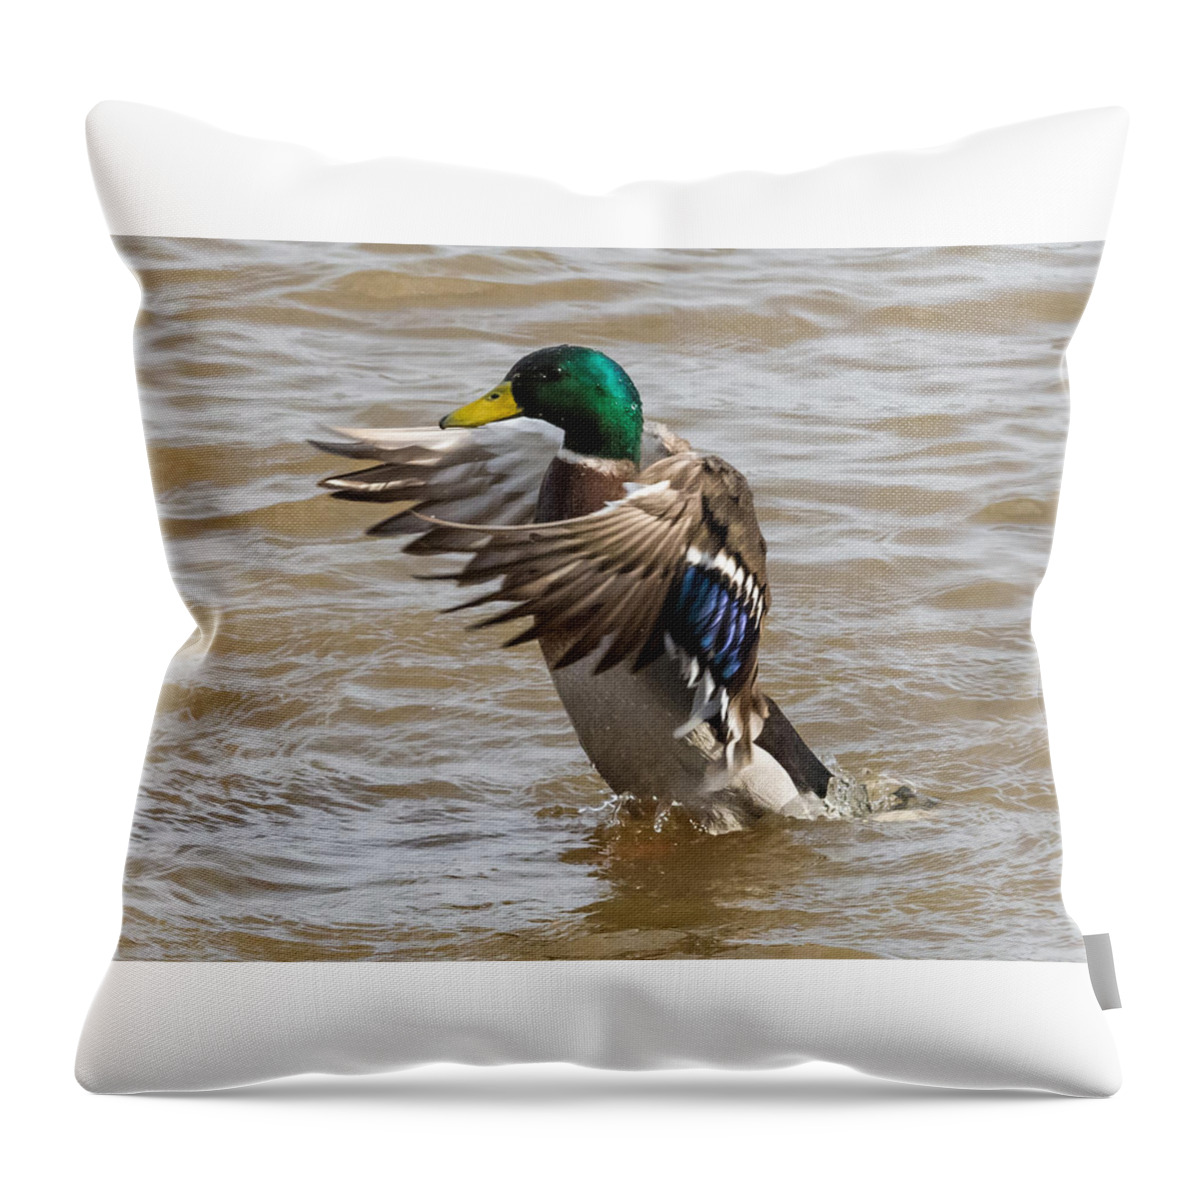 Male Throw Pillow featuring the photograph Male Mallard by Holden The Moment